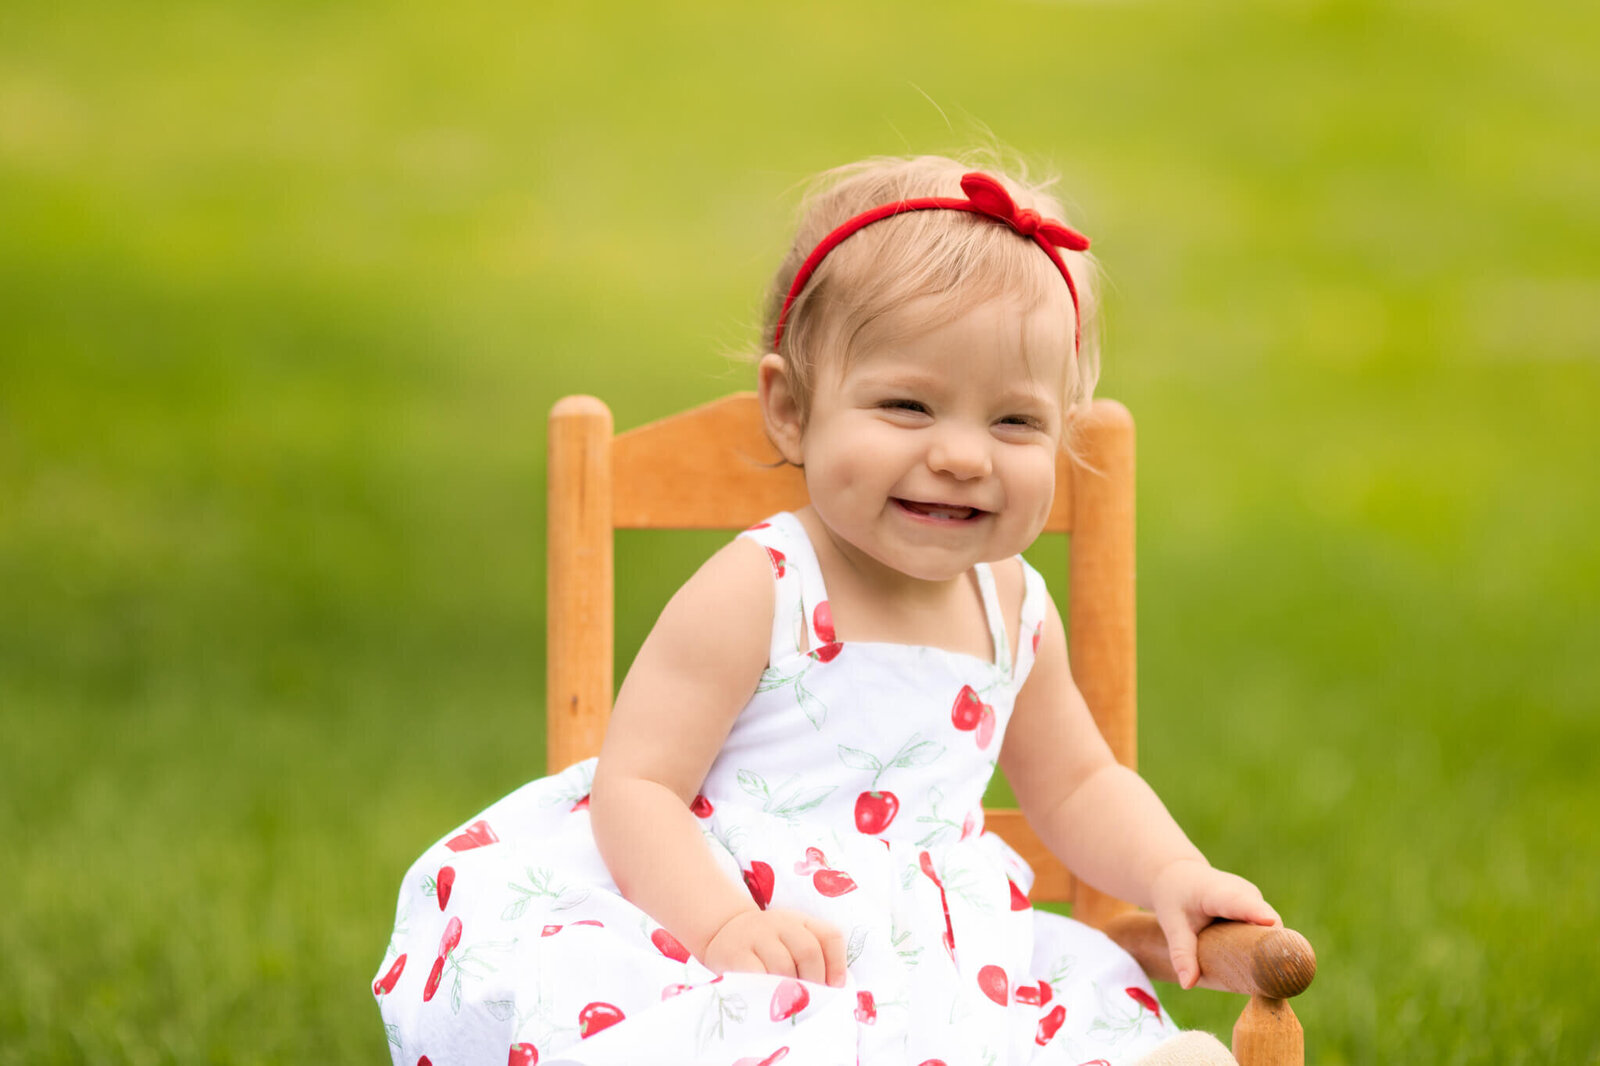 One year old girl sitting in a rocking chair in grass